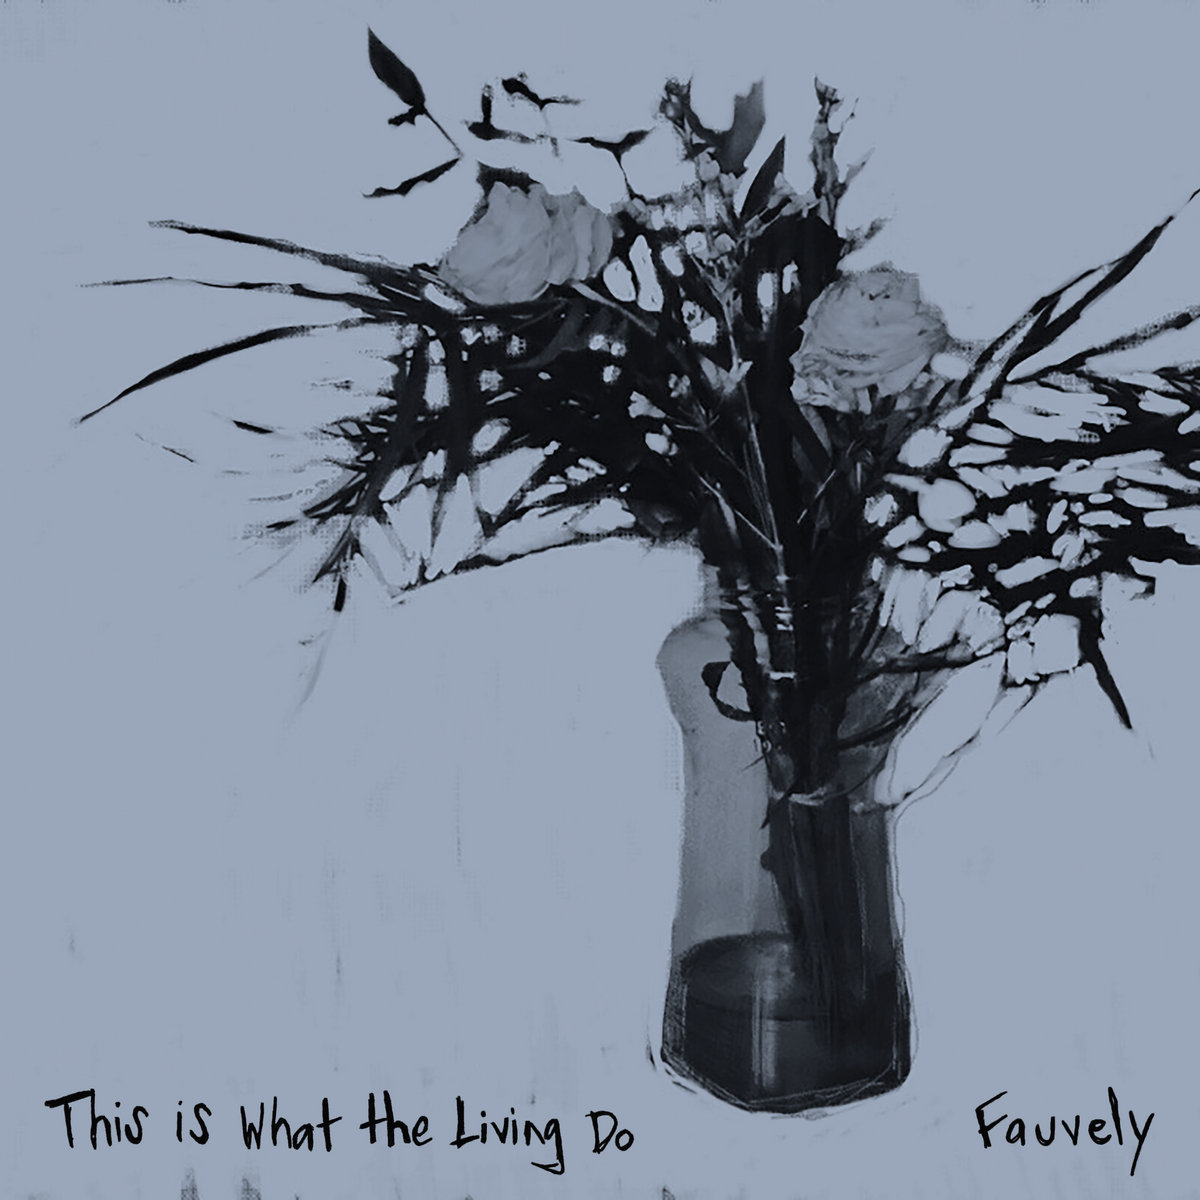 This Is What the Living Do by Fauvely